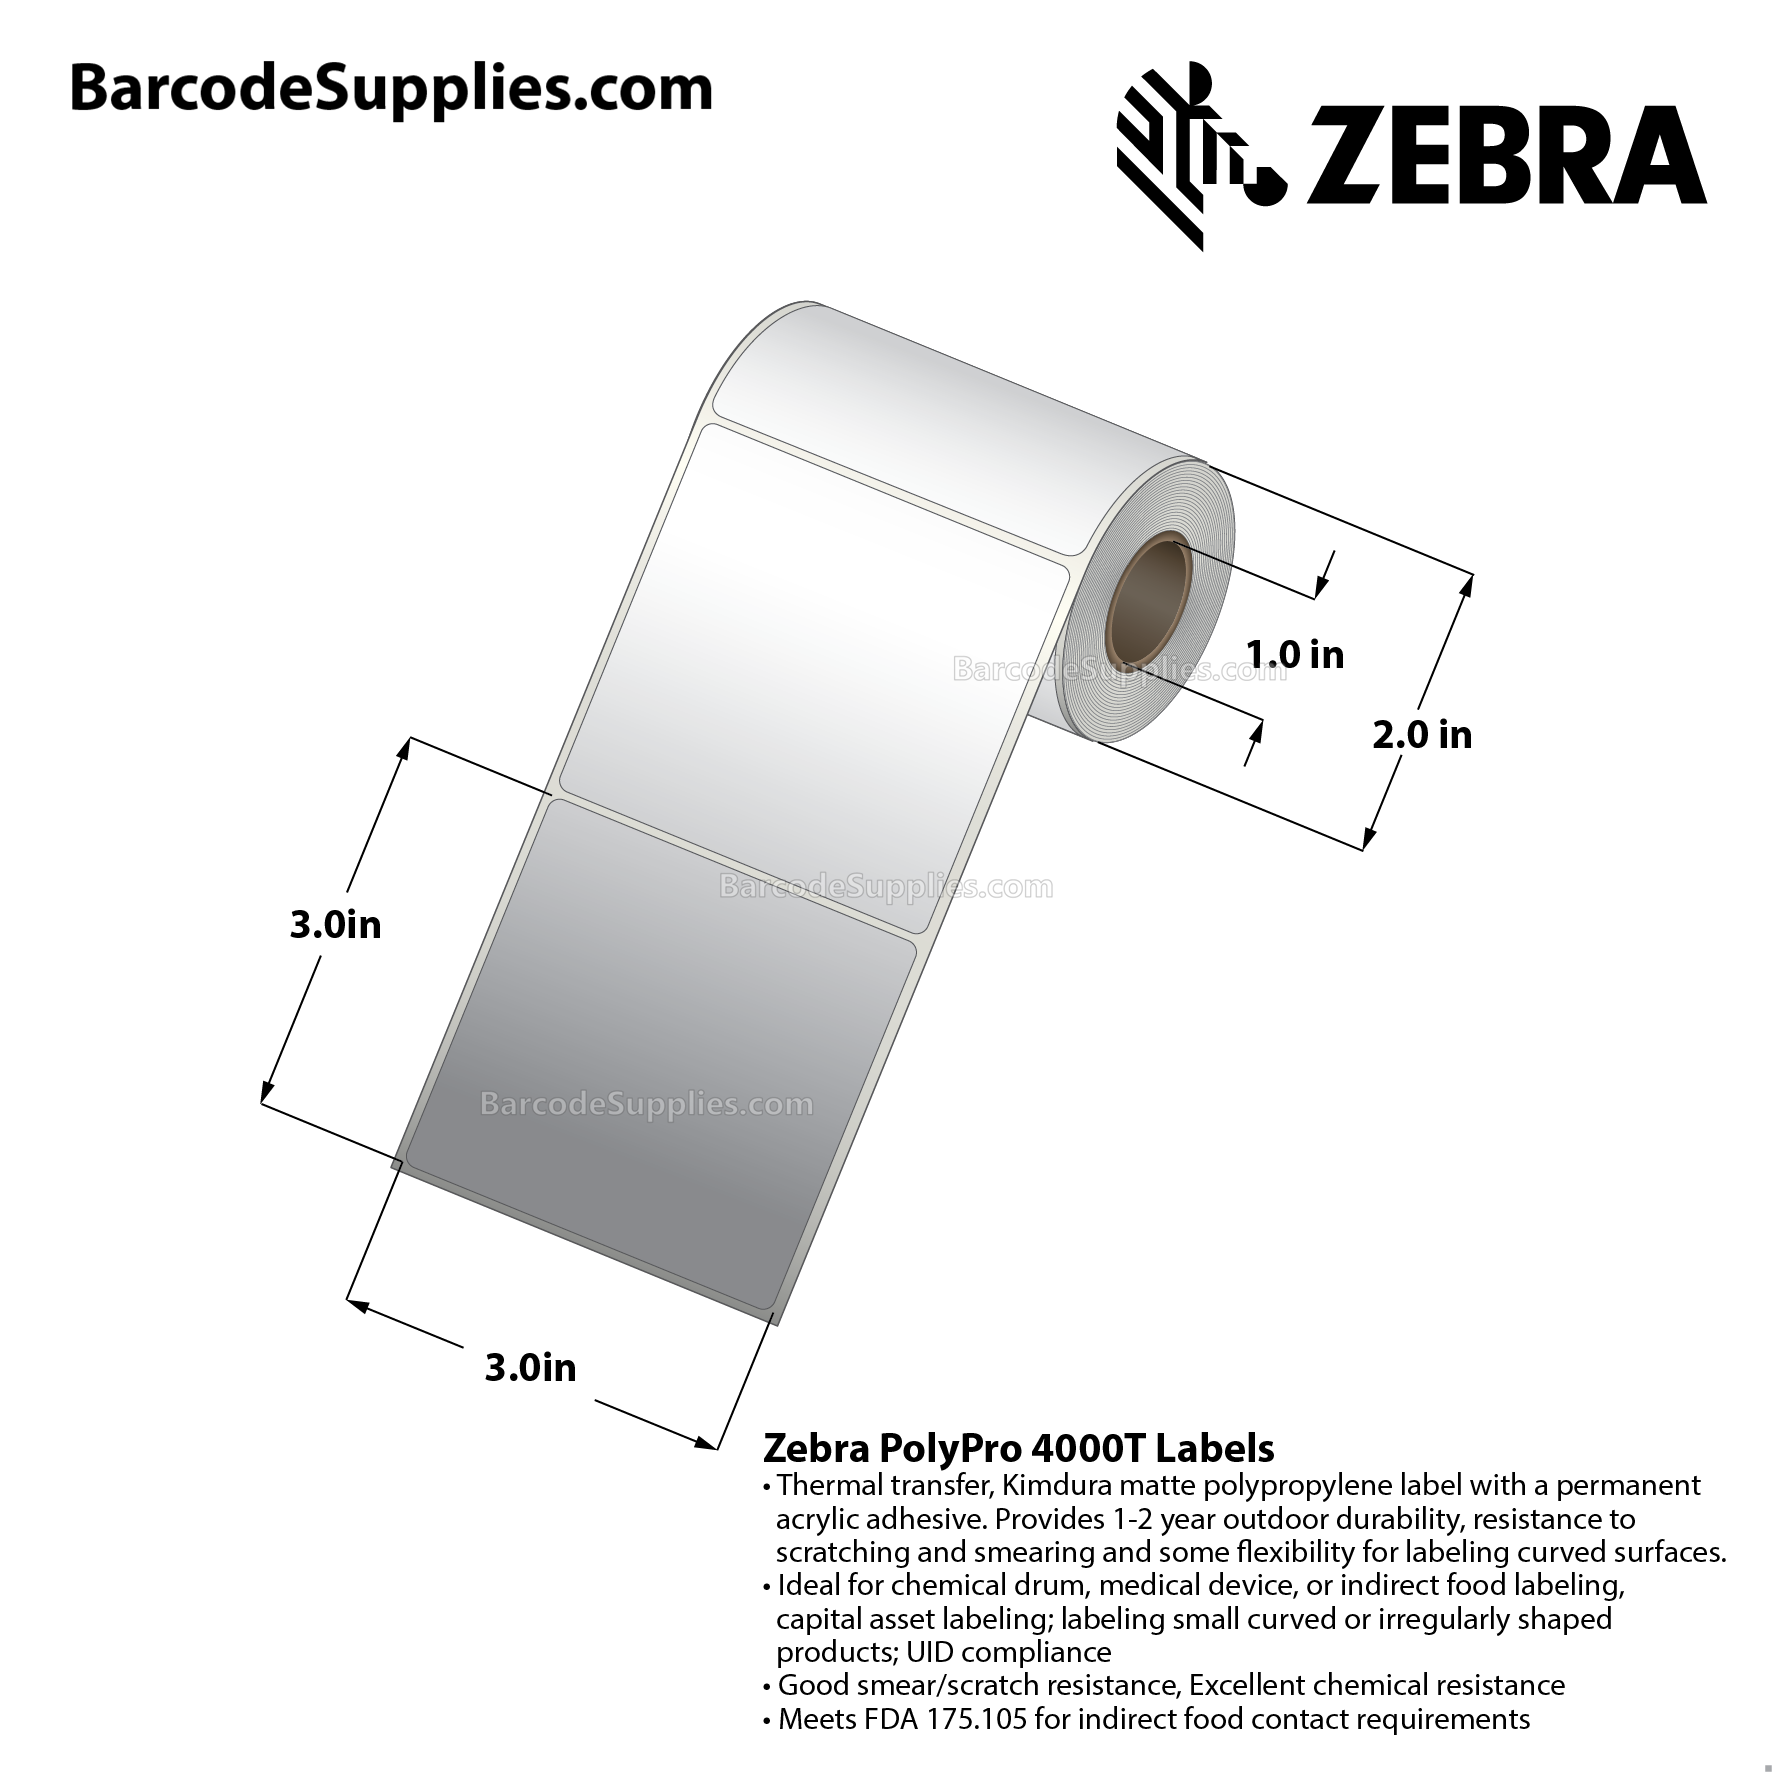 3 x 3 Thermal Transfer White PolyPro 4000T Labels With Permanent Adhesive - Not Perforated - 90 Labels Per Roll - Carton Of 12 Rolls - 1080 Labels Total - MPN: 82413